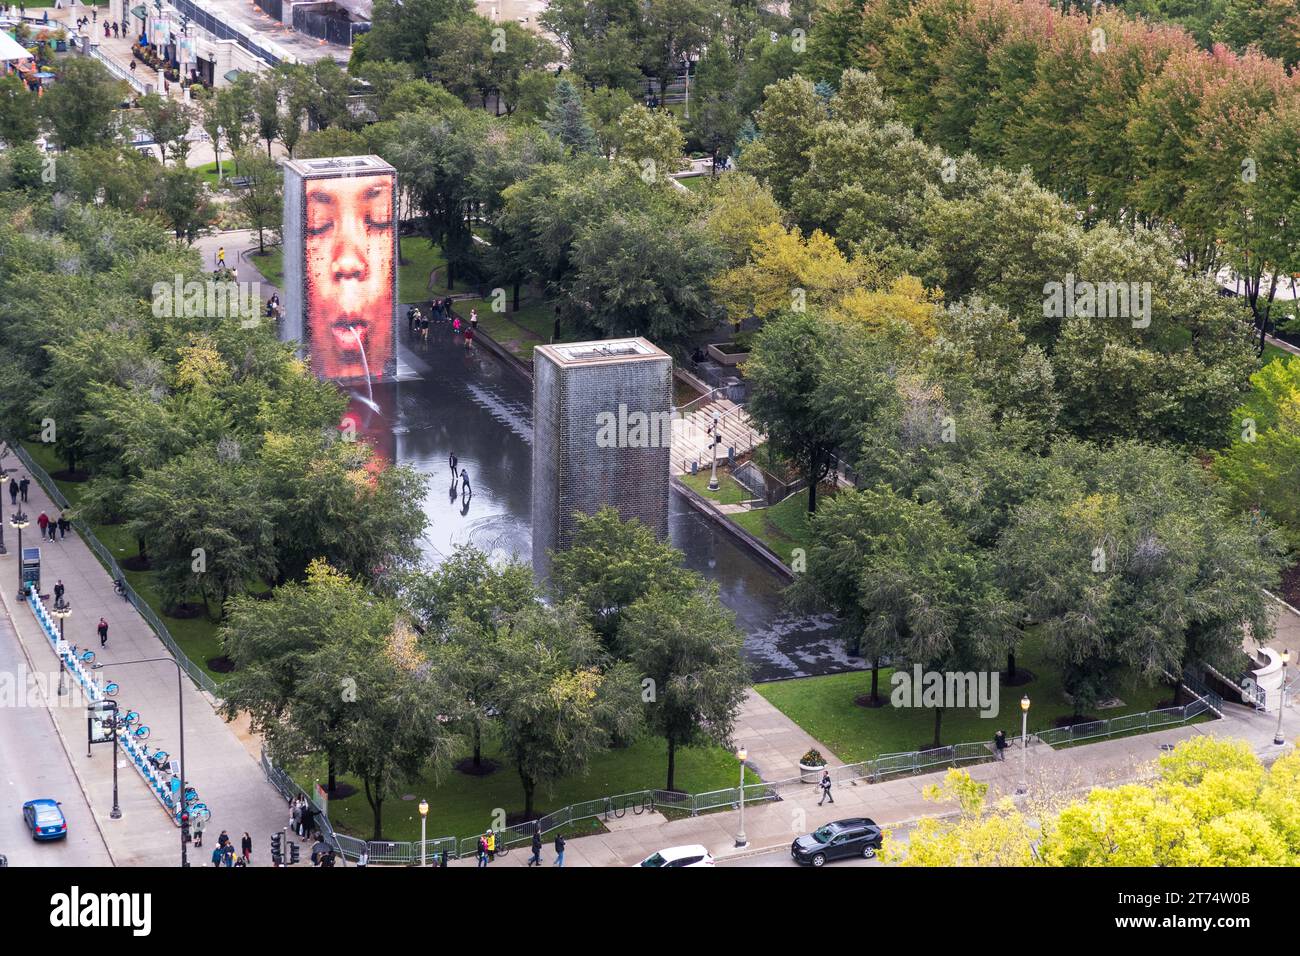 The Crown Fountain is a public sculpture with 2 50-ft. LED towers & a reflecting pool, by Catalan artist Jaume Plensa in Chicago, United States Stock Photo